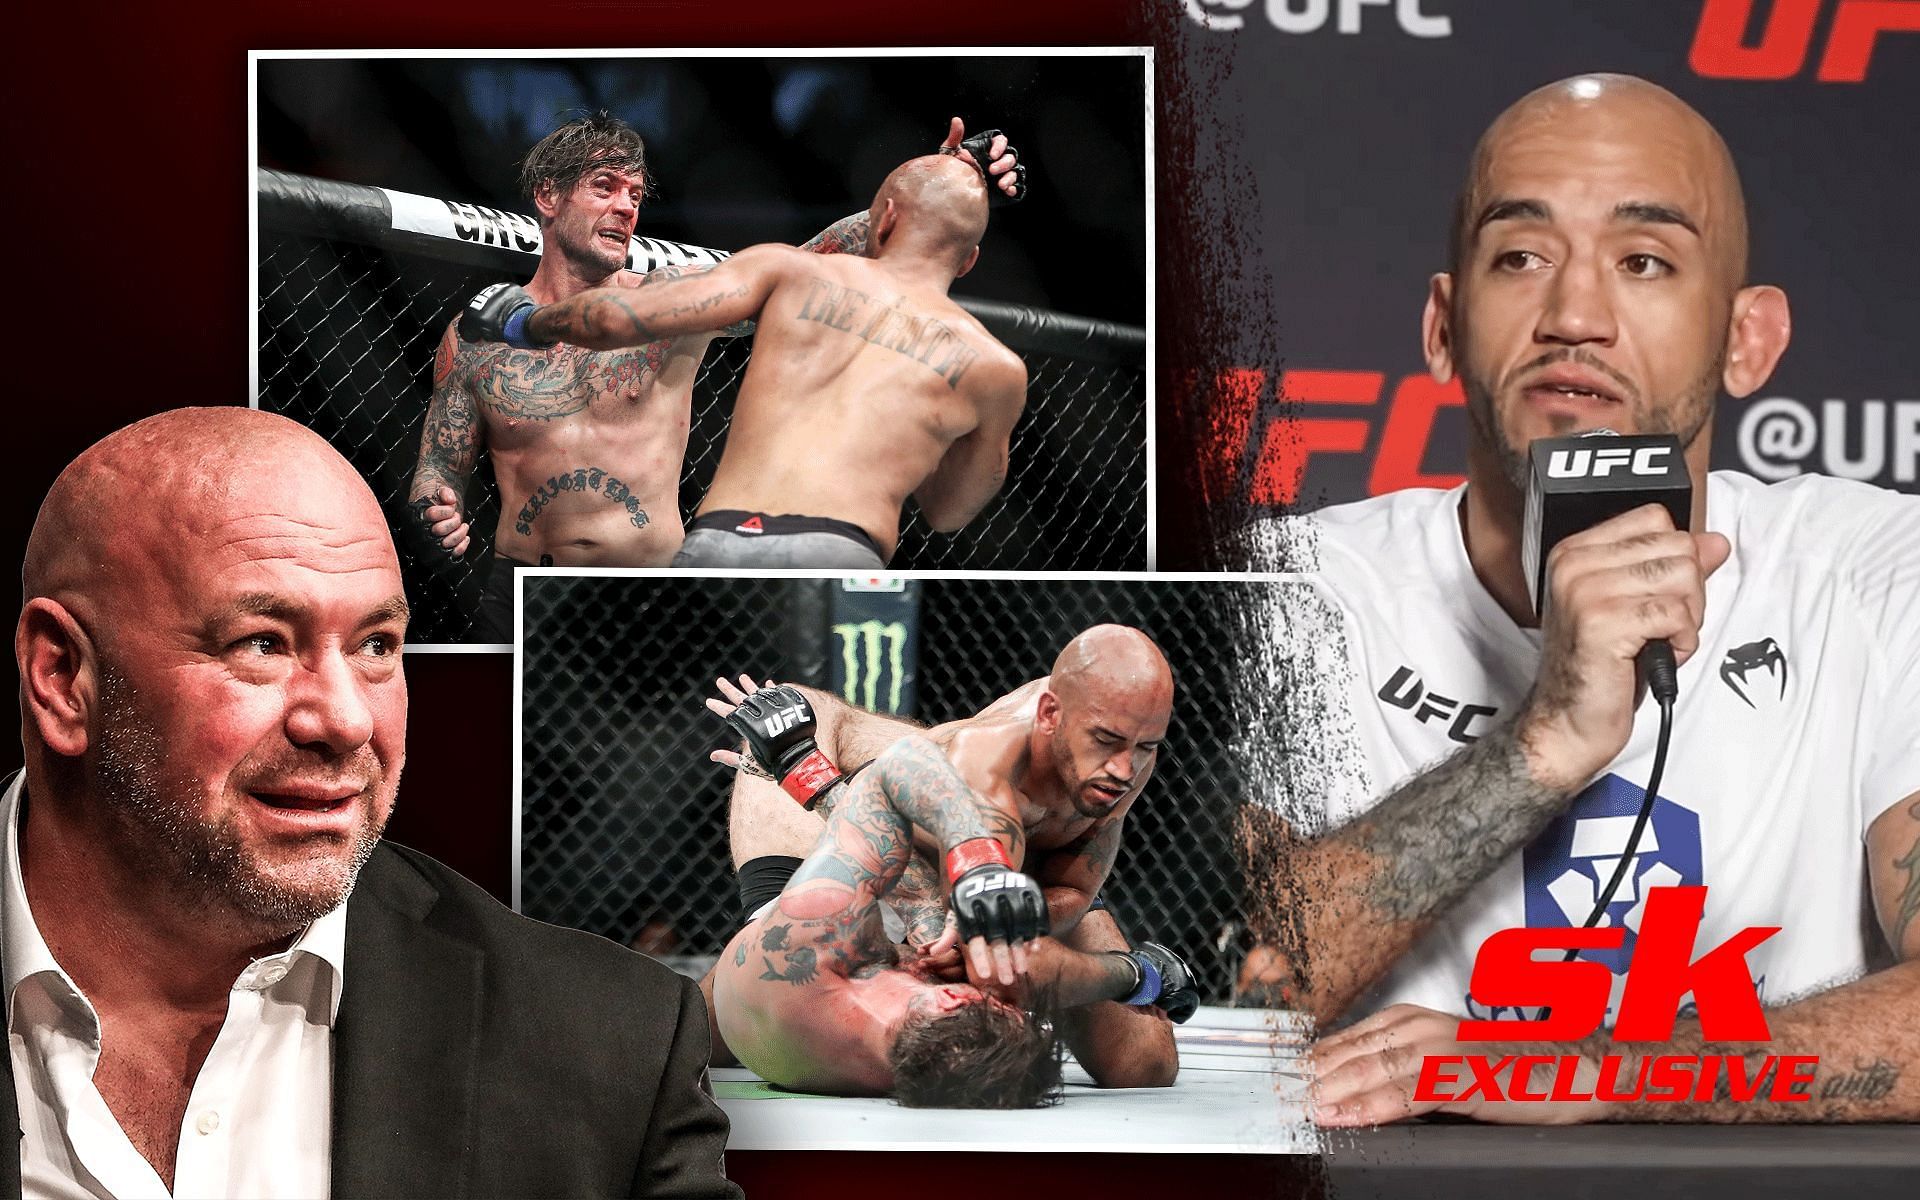 Mike Jackson discusses winning over Dana White after CM Punk fight [Photo credit: MMA Junkie on YouTube]